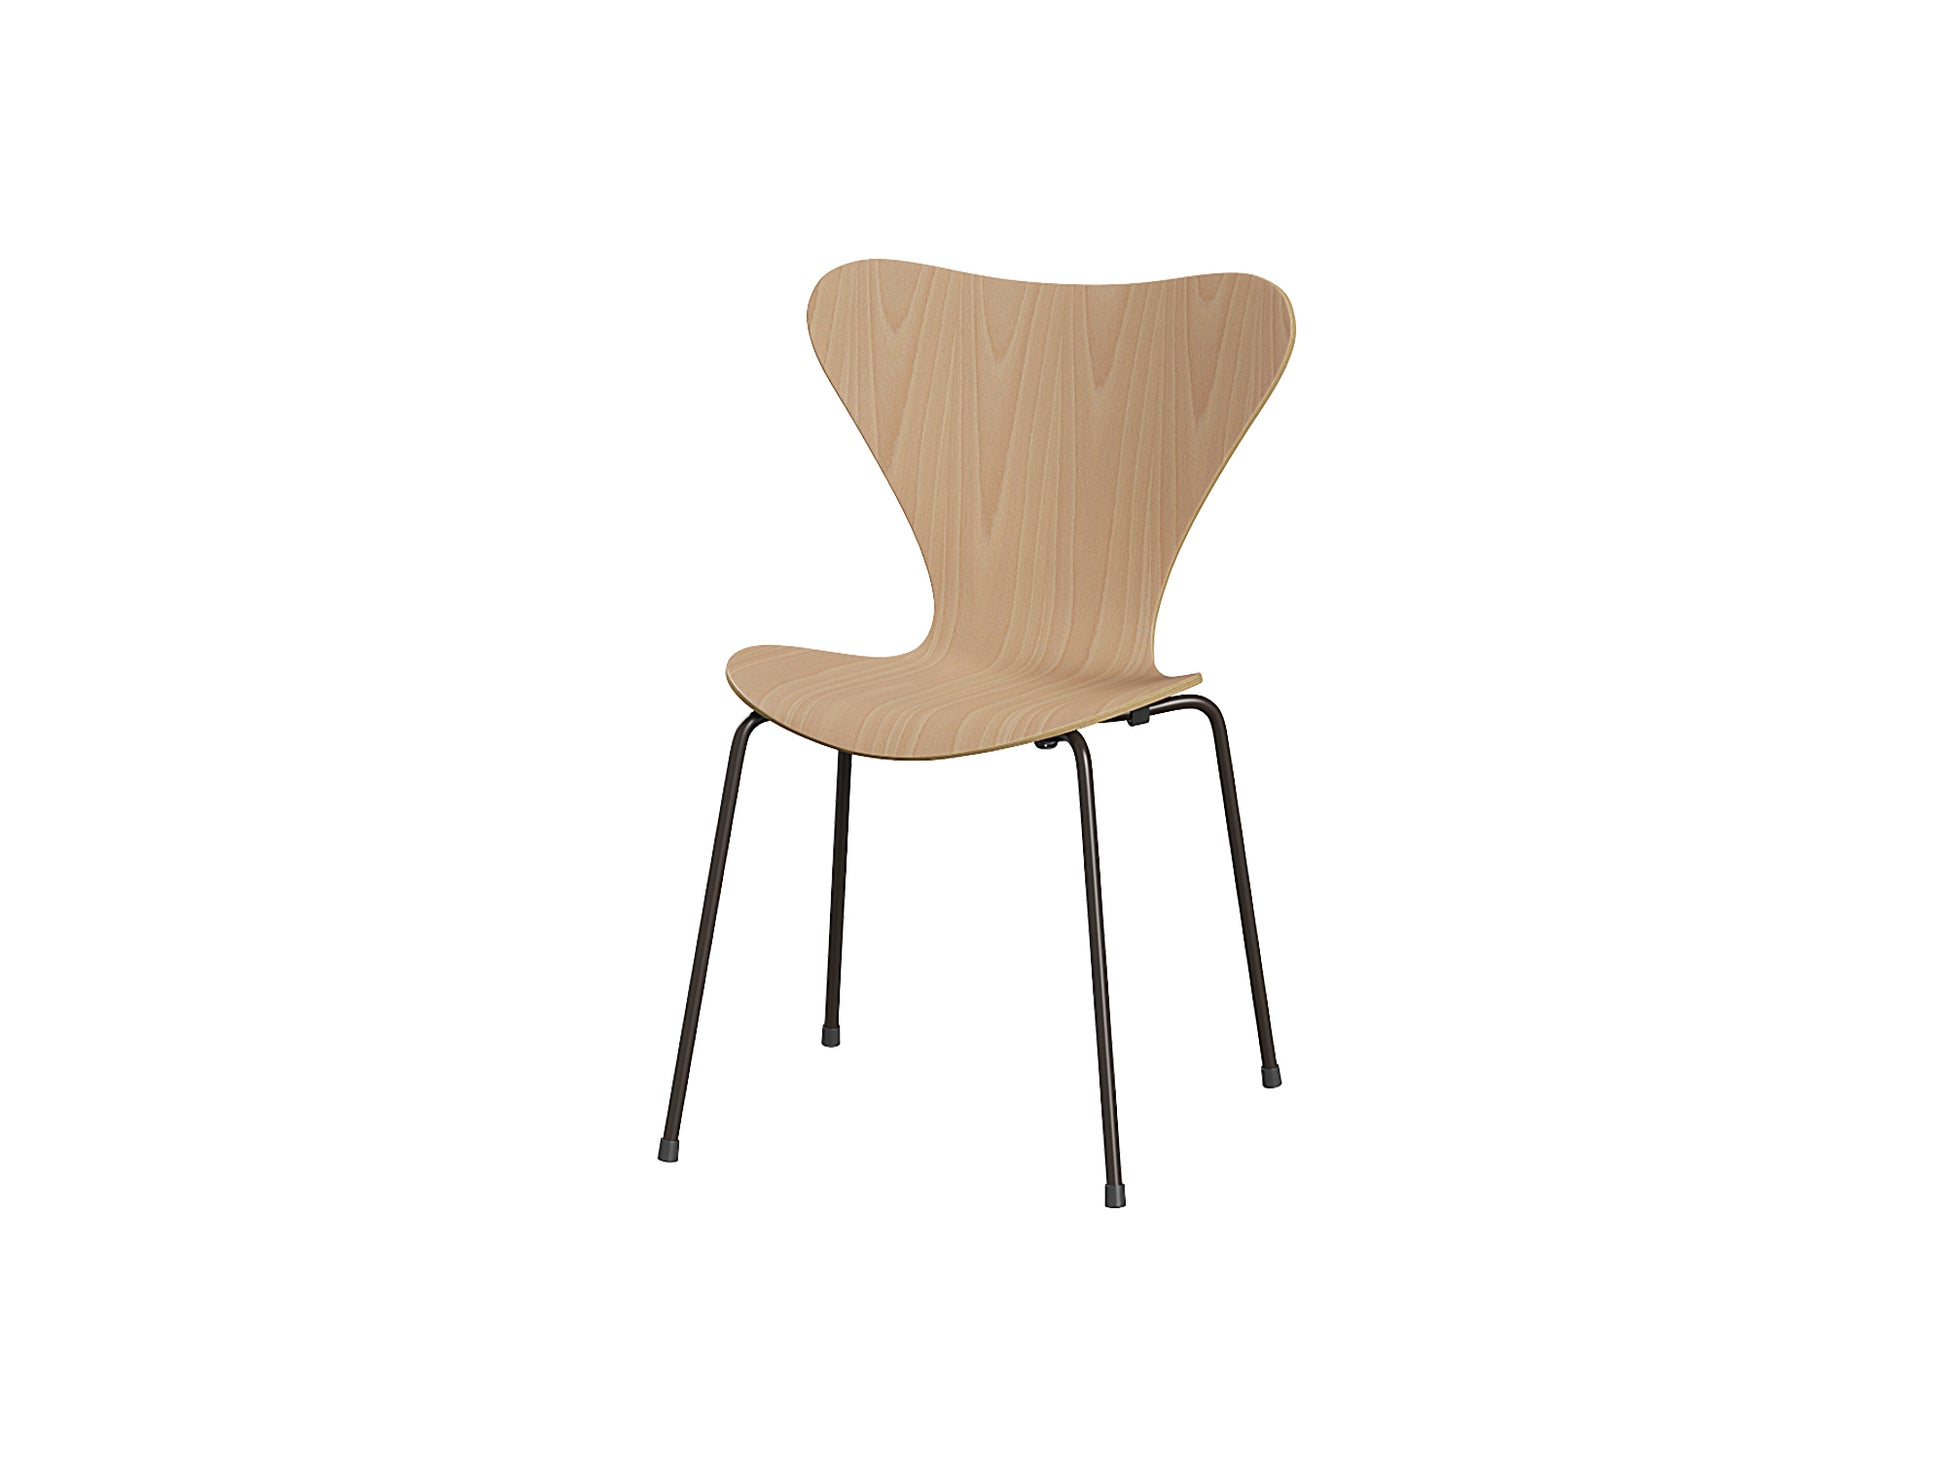 Series 7 Dining Chair (Clear Lacquered Wood) by Fritz Hanse - Beech / Brown Bronze Steel